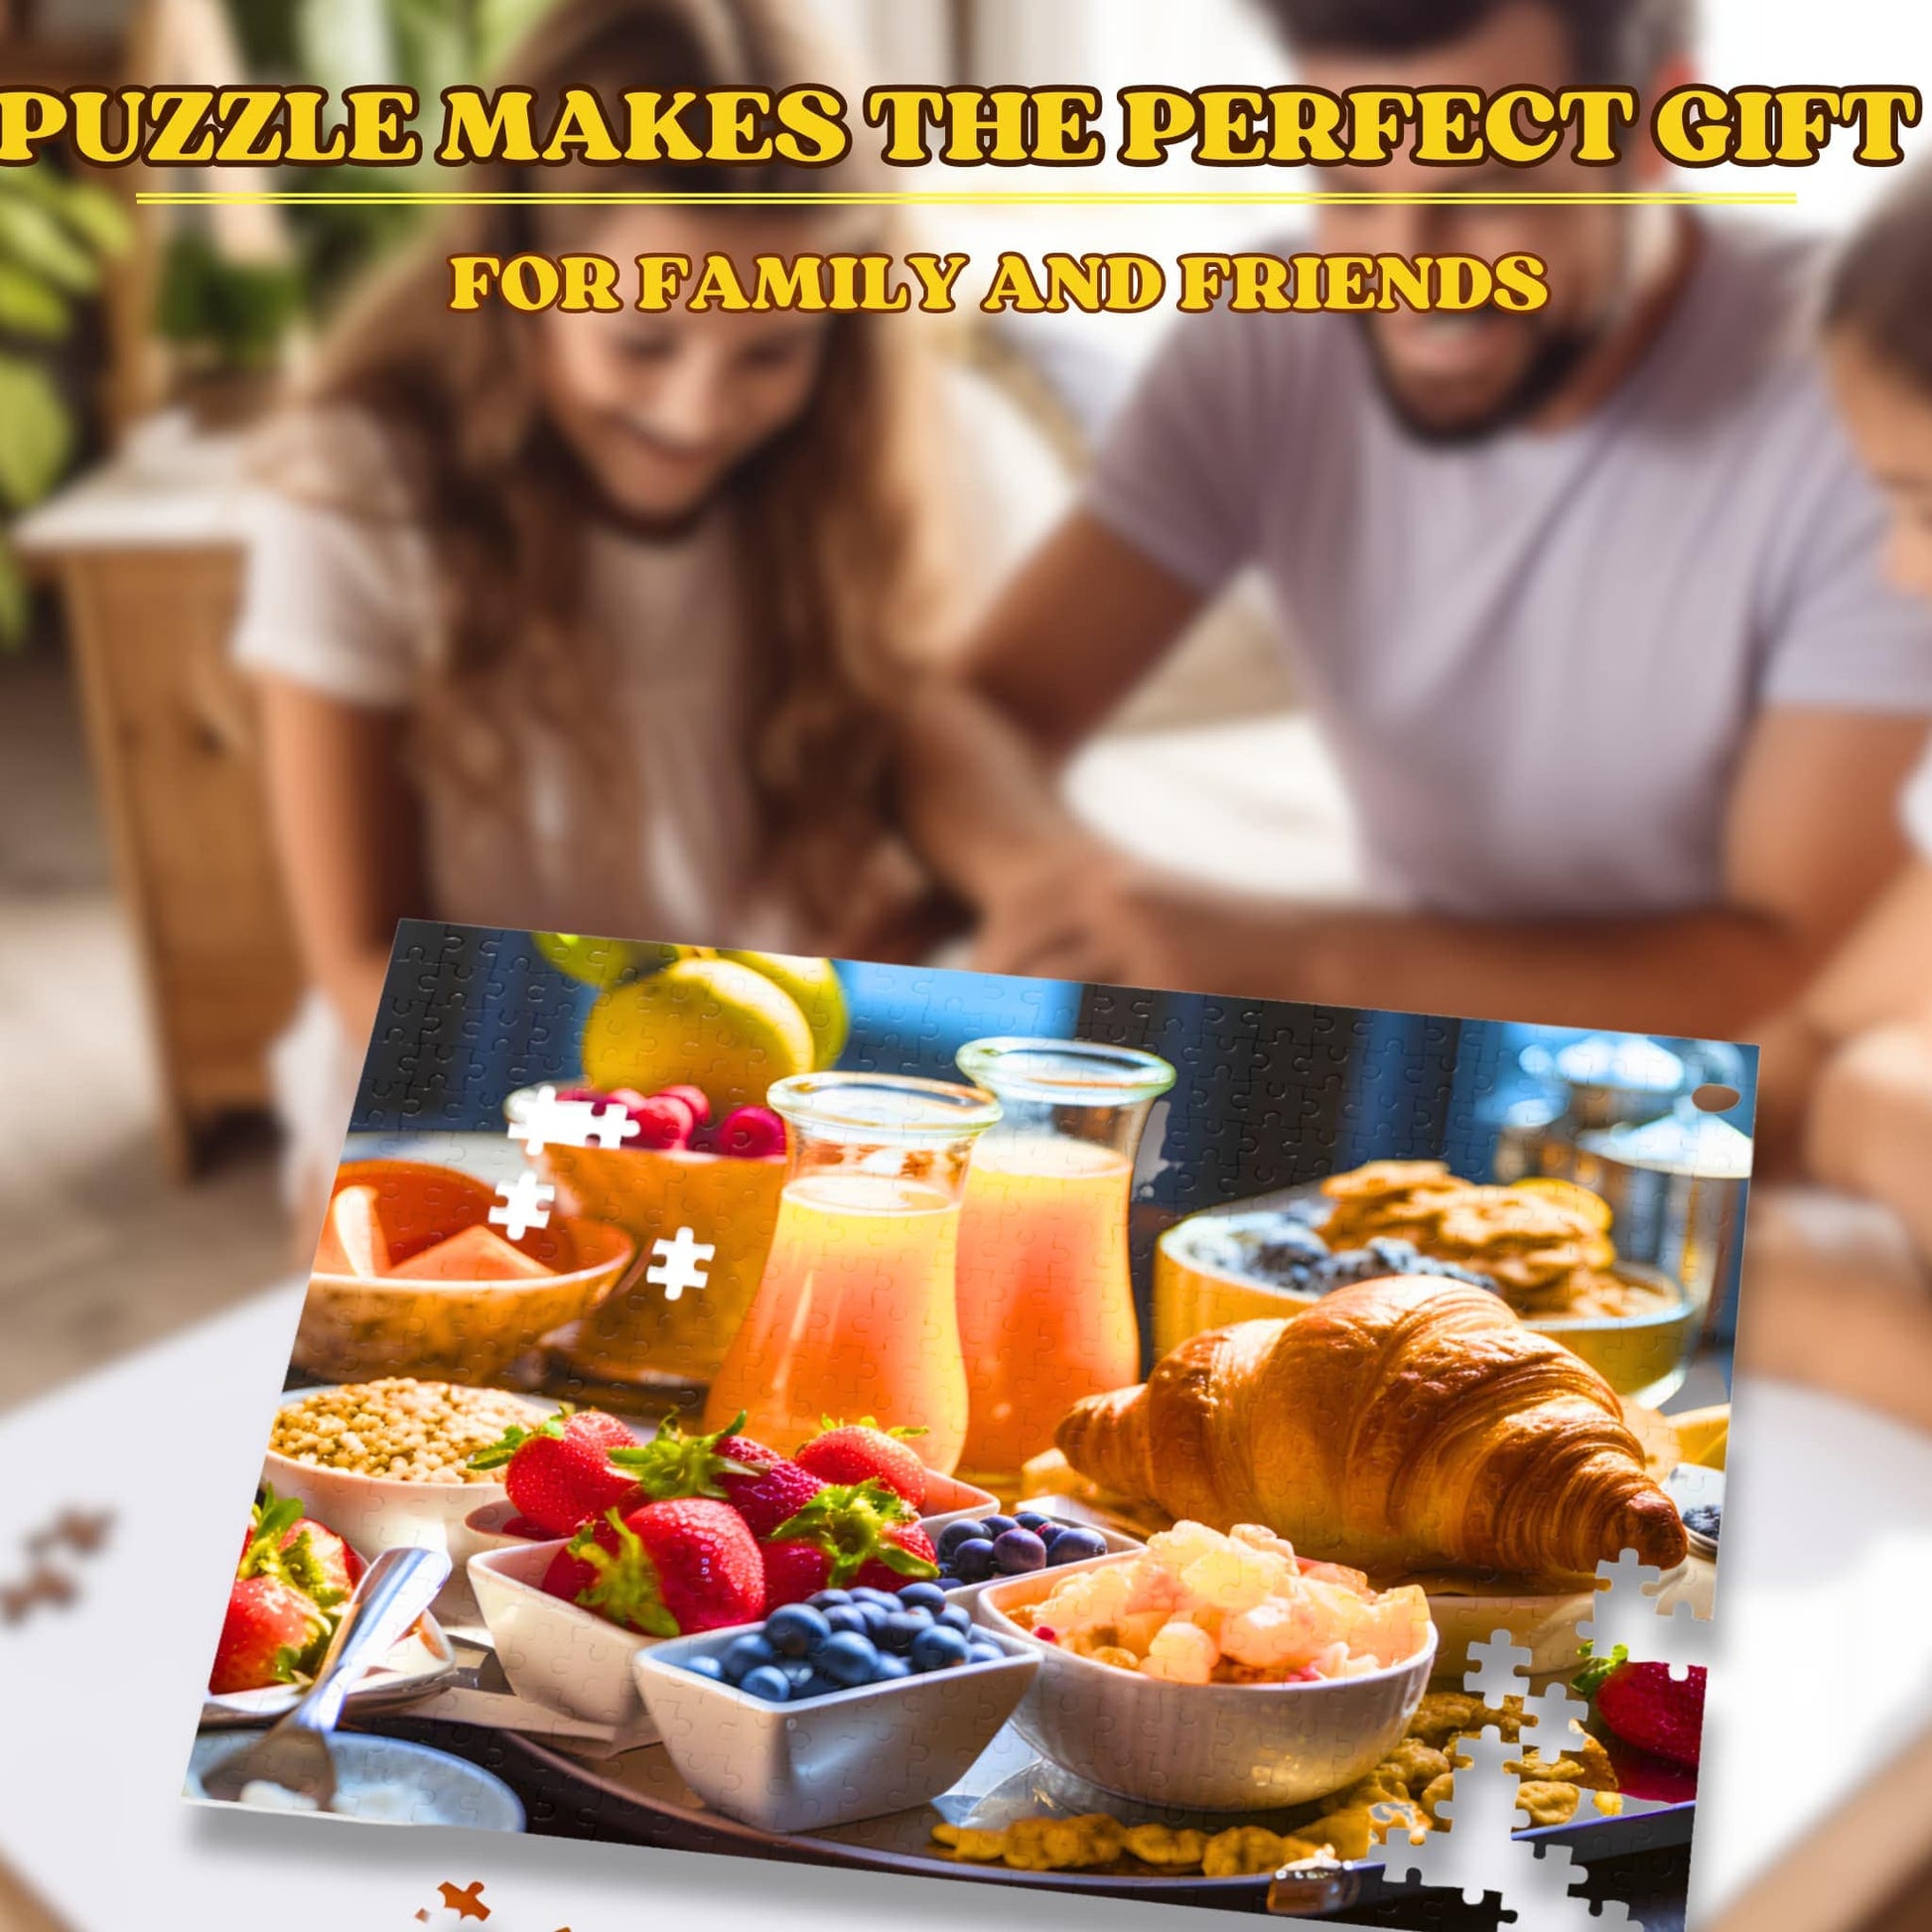 A happy family engaged in assembling the Adult Jigsaw Puzzle 500 Piece, highlighting the game's suitability for both adults and kids and its role as a joyful family activity.